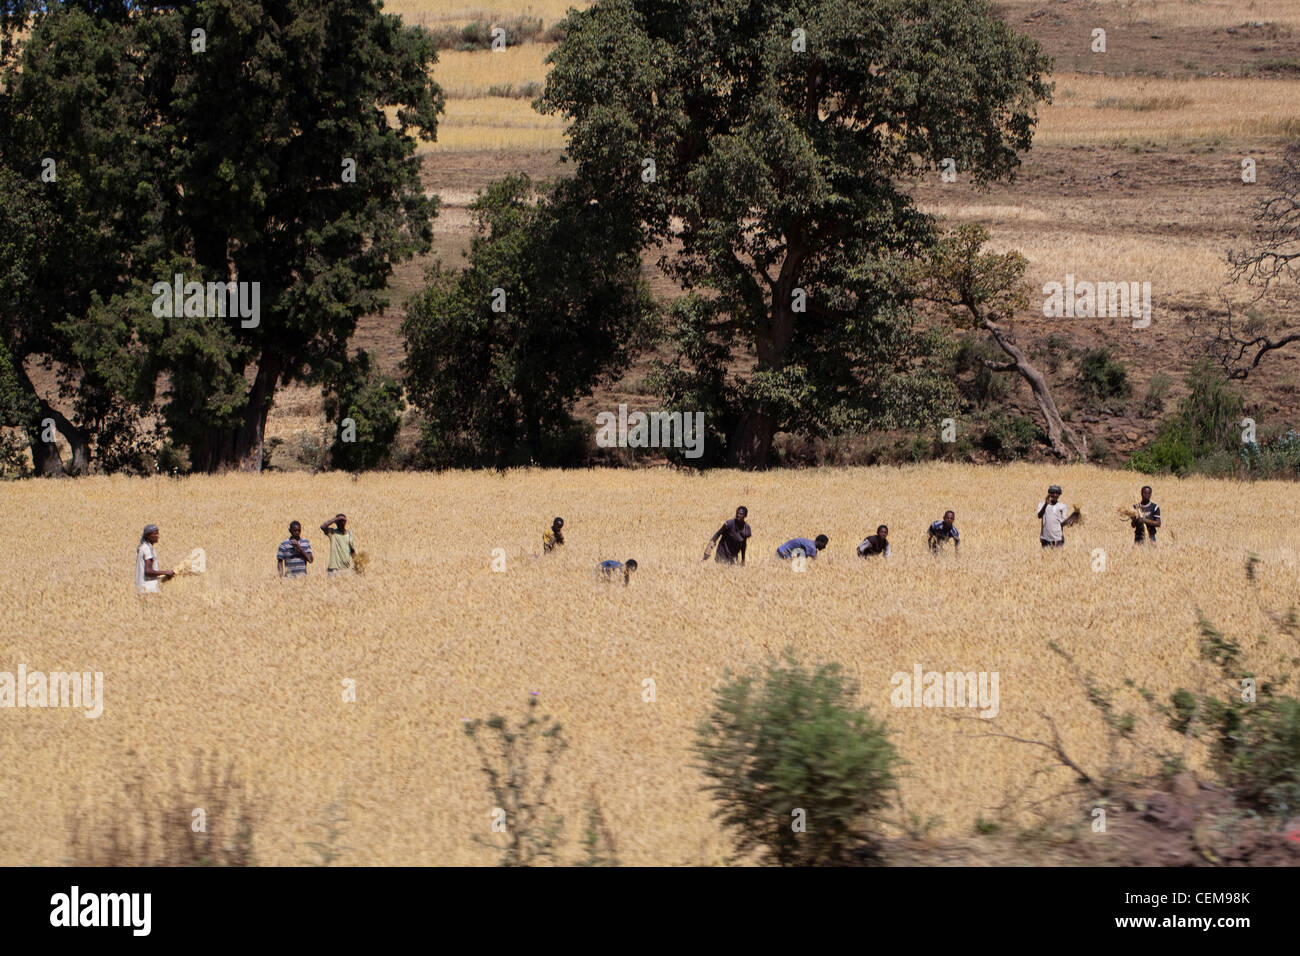 Men working as a team, cutting cereal crop across a field. Harvesting November. Ethiopia. Stock Photo